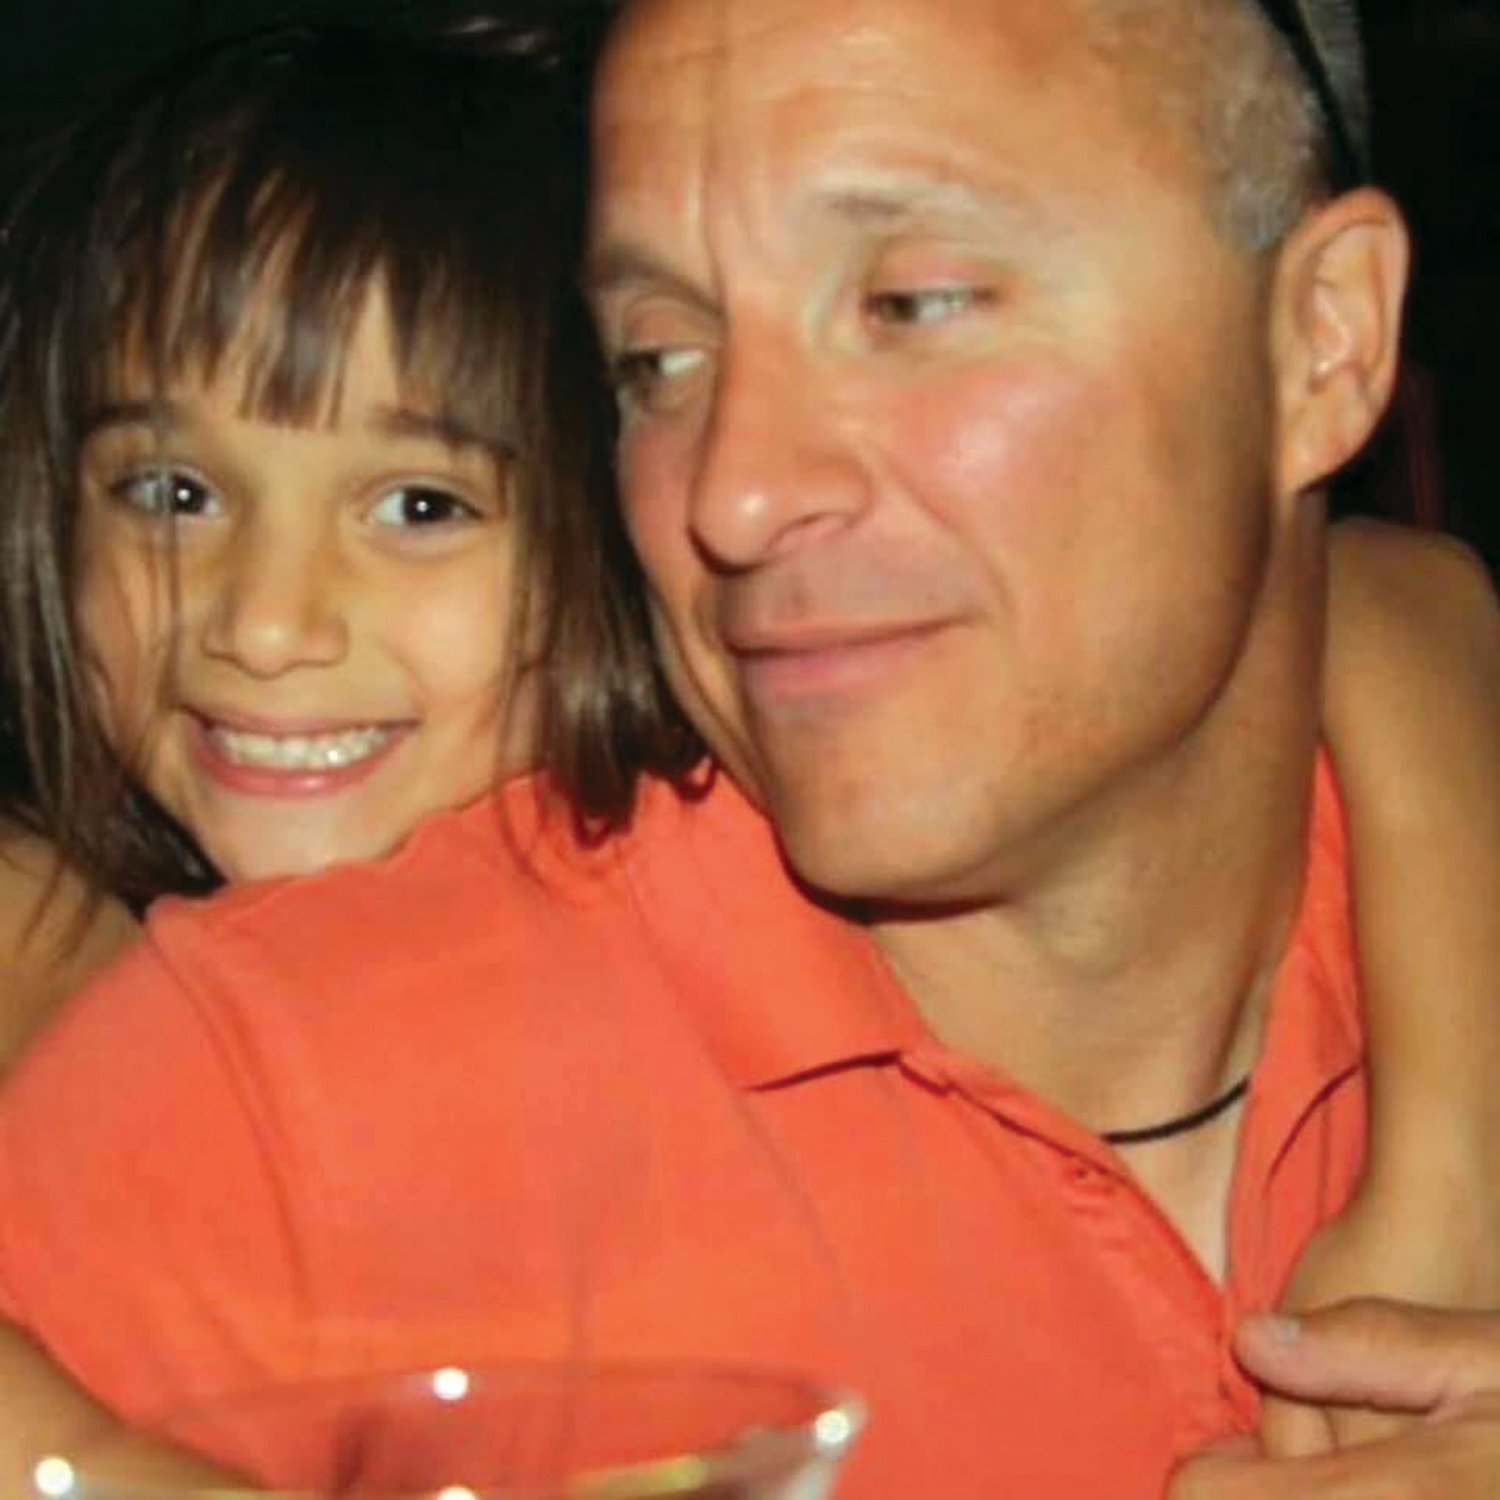 Olivia Passaretti poses for a photo with her late father, Michael, who passed away in 2015 at the age of 46, when Olivia was just 11 years old.